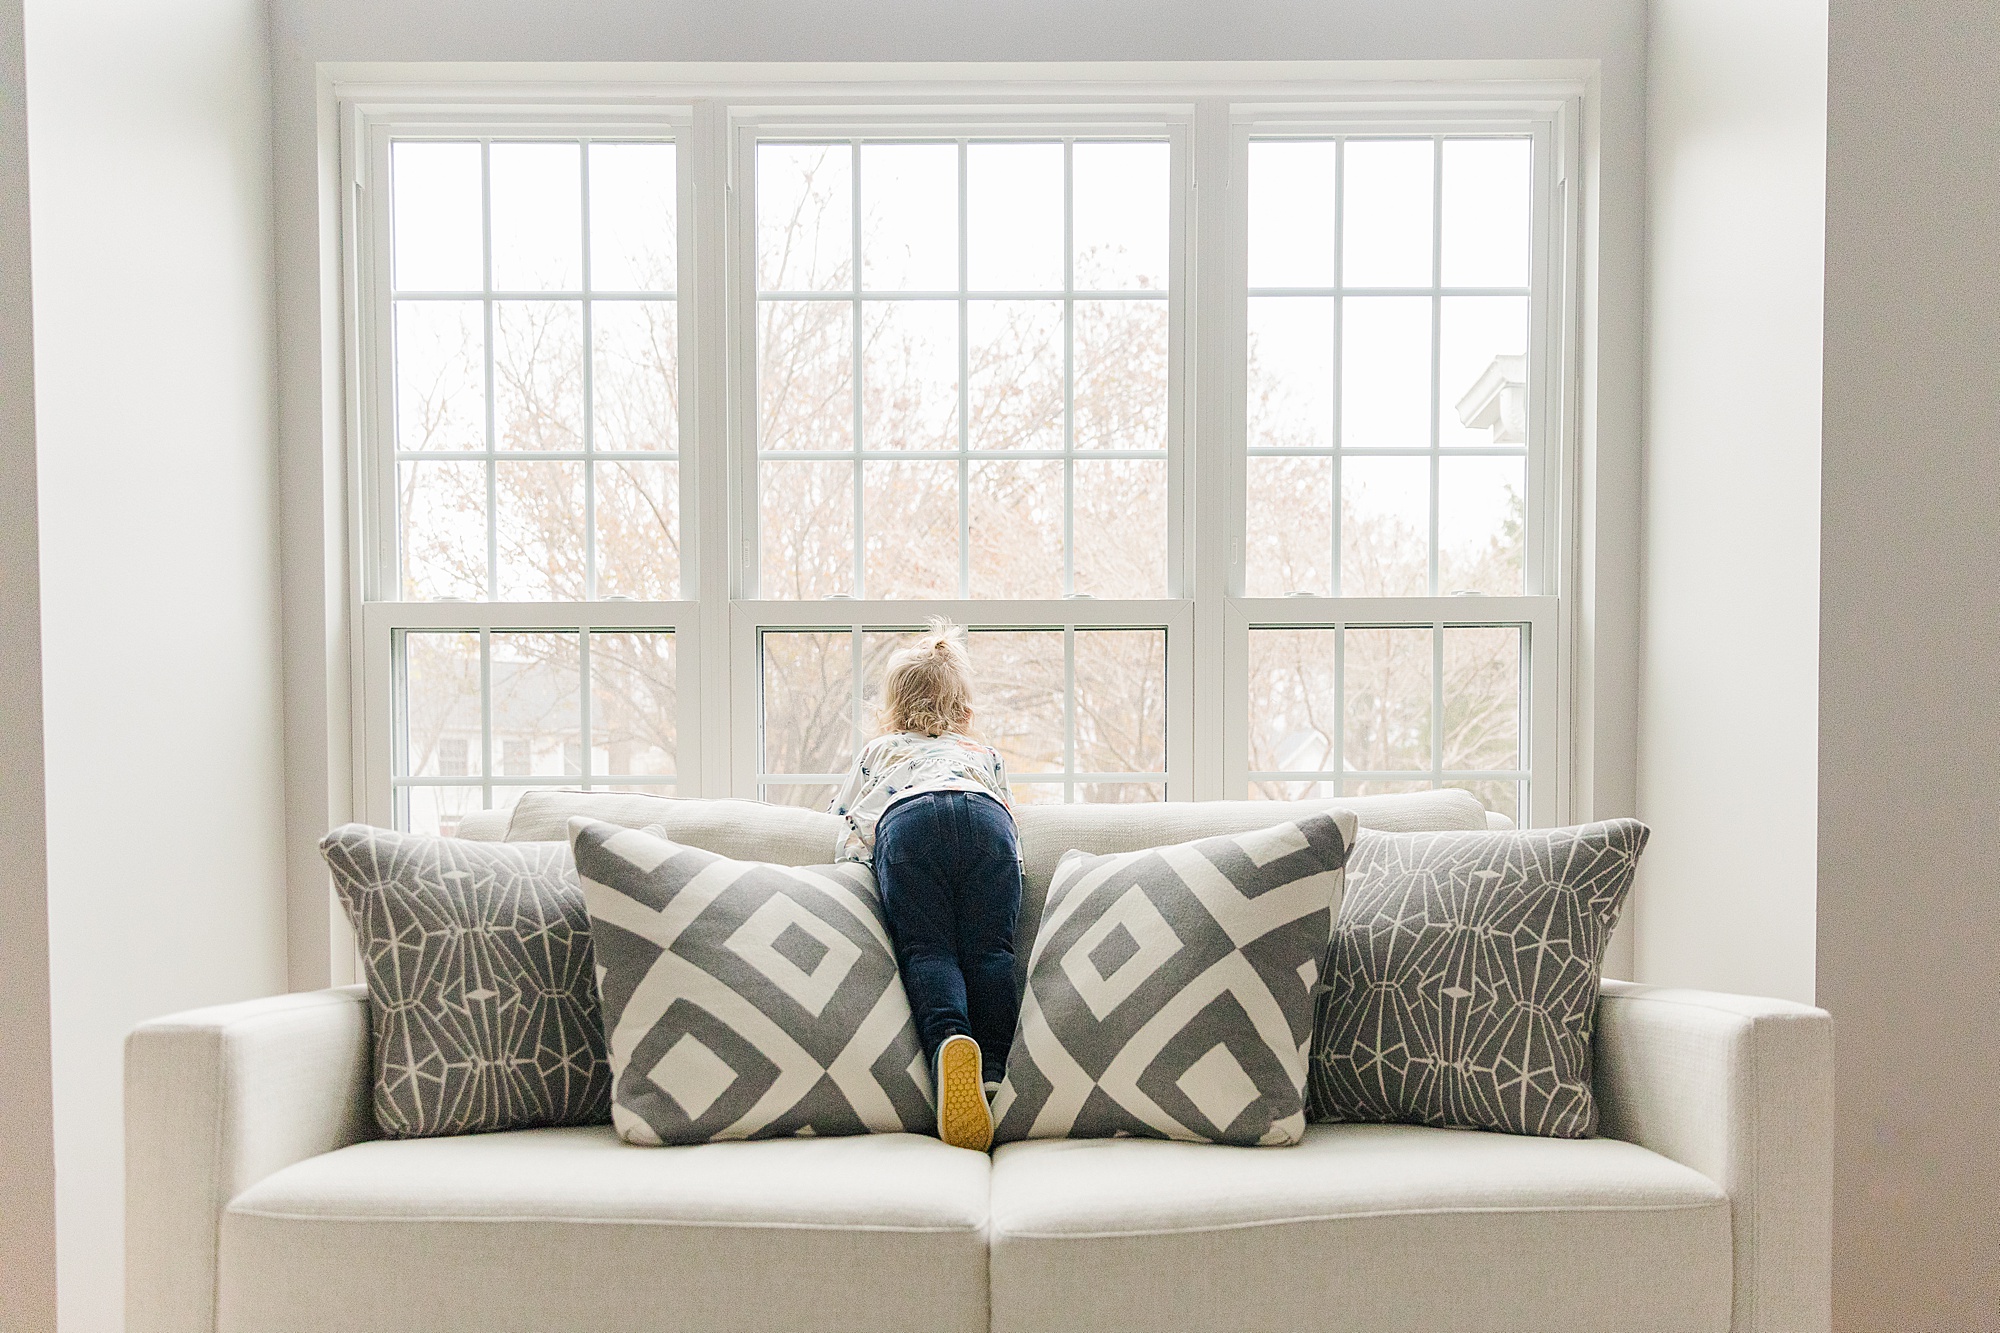 Toddler stands on couch during MD family photos 